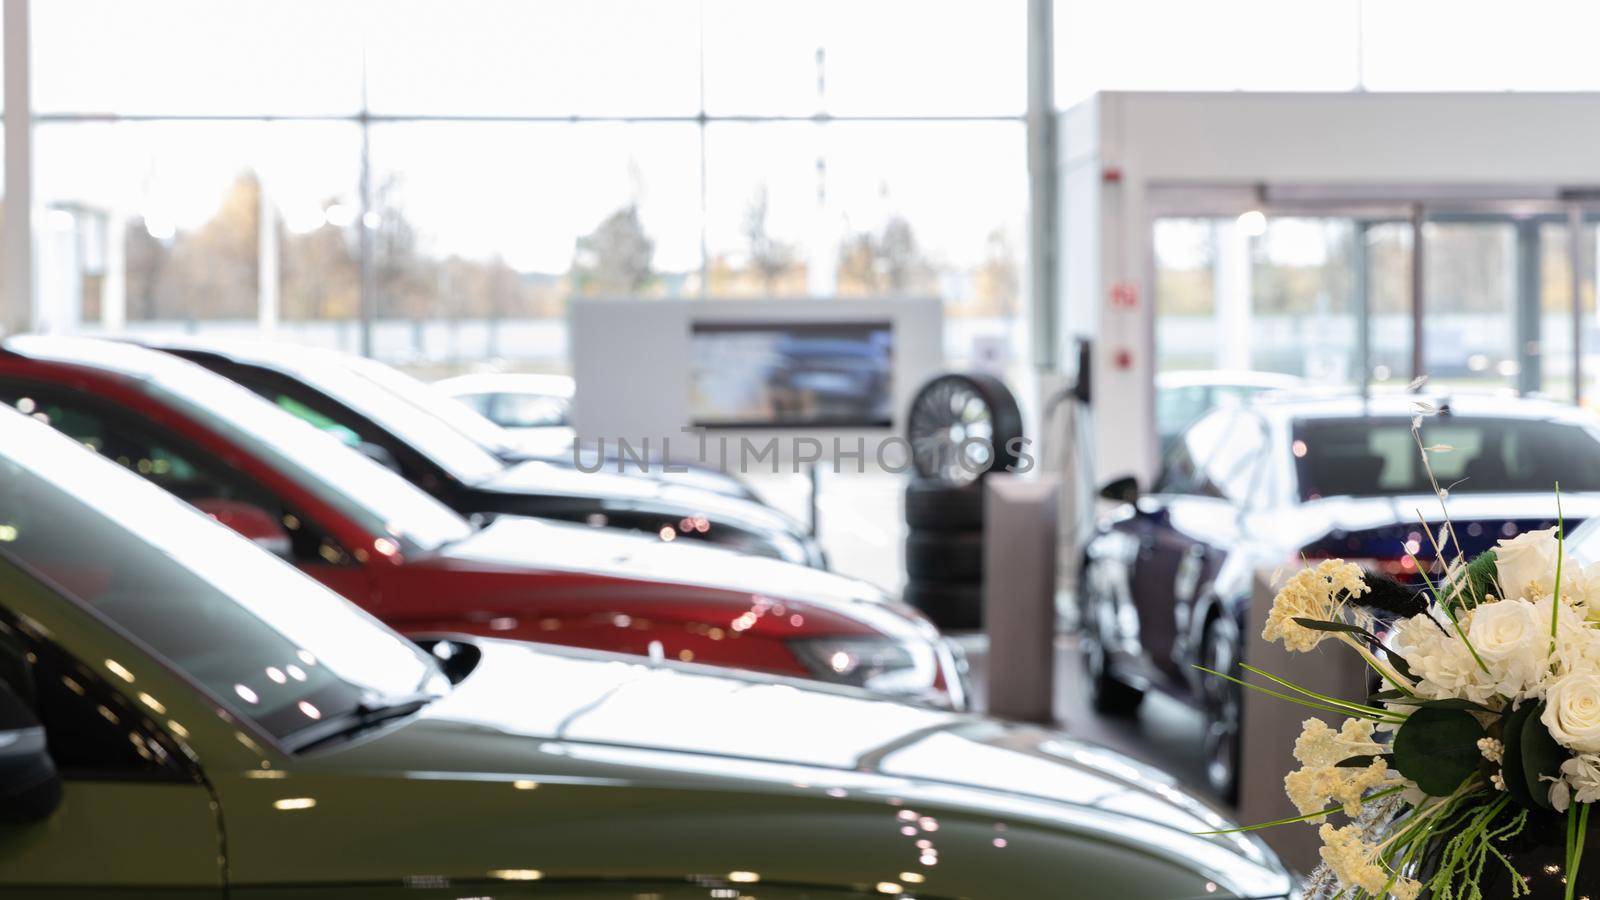 showroom of an official car dealership, photo with depth of field focus in the foreground.